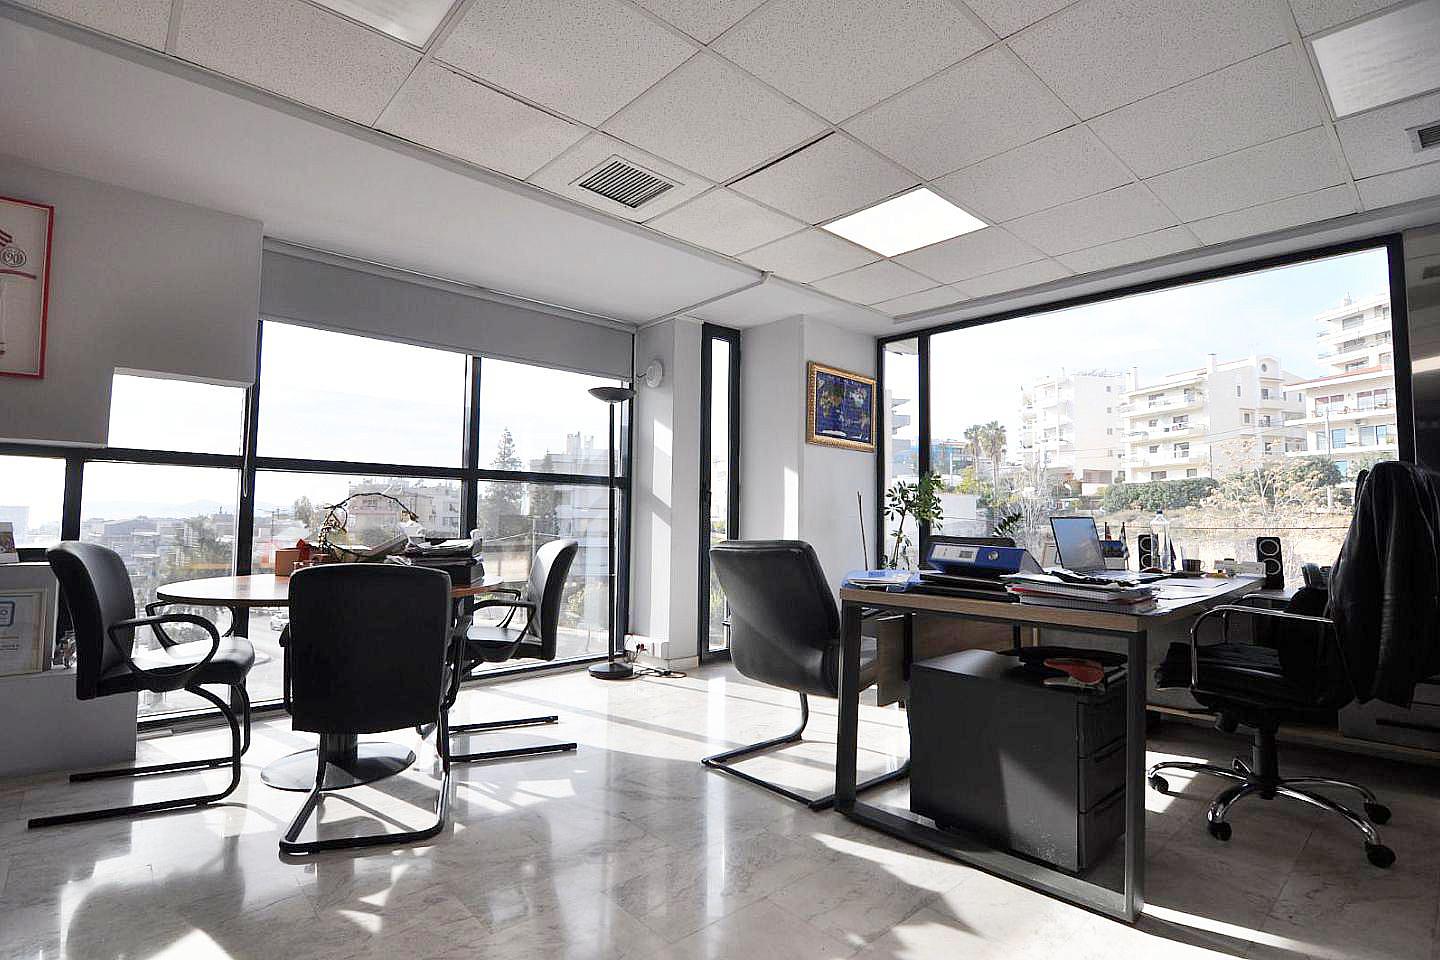 Main Photo of a Office for sale